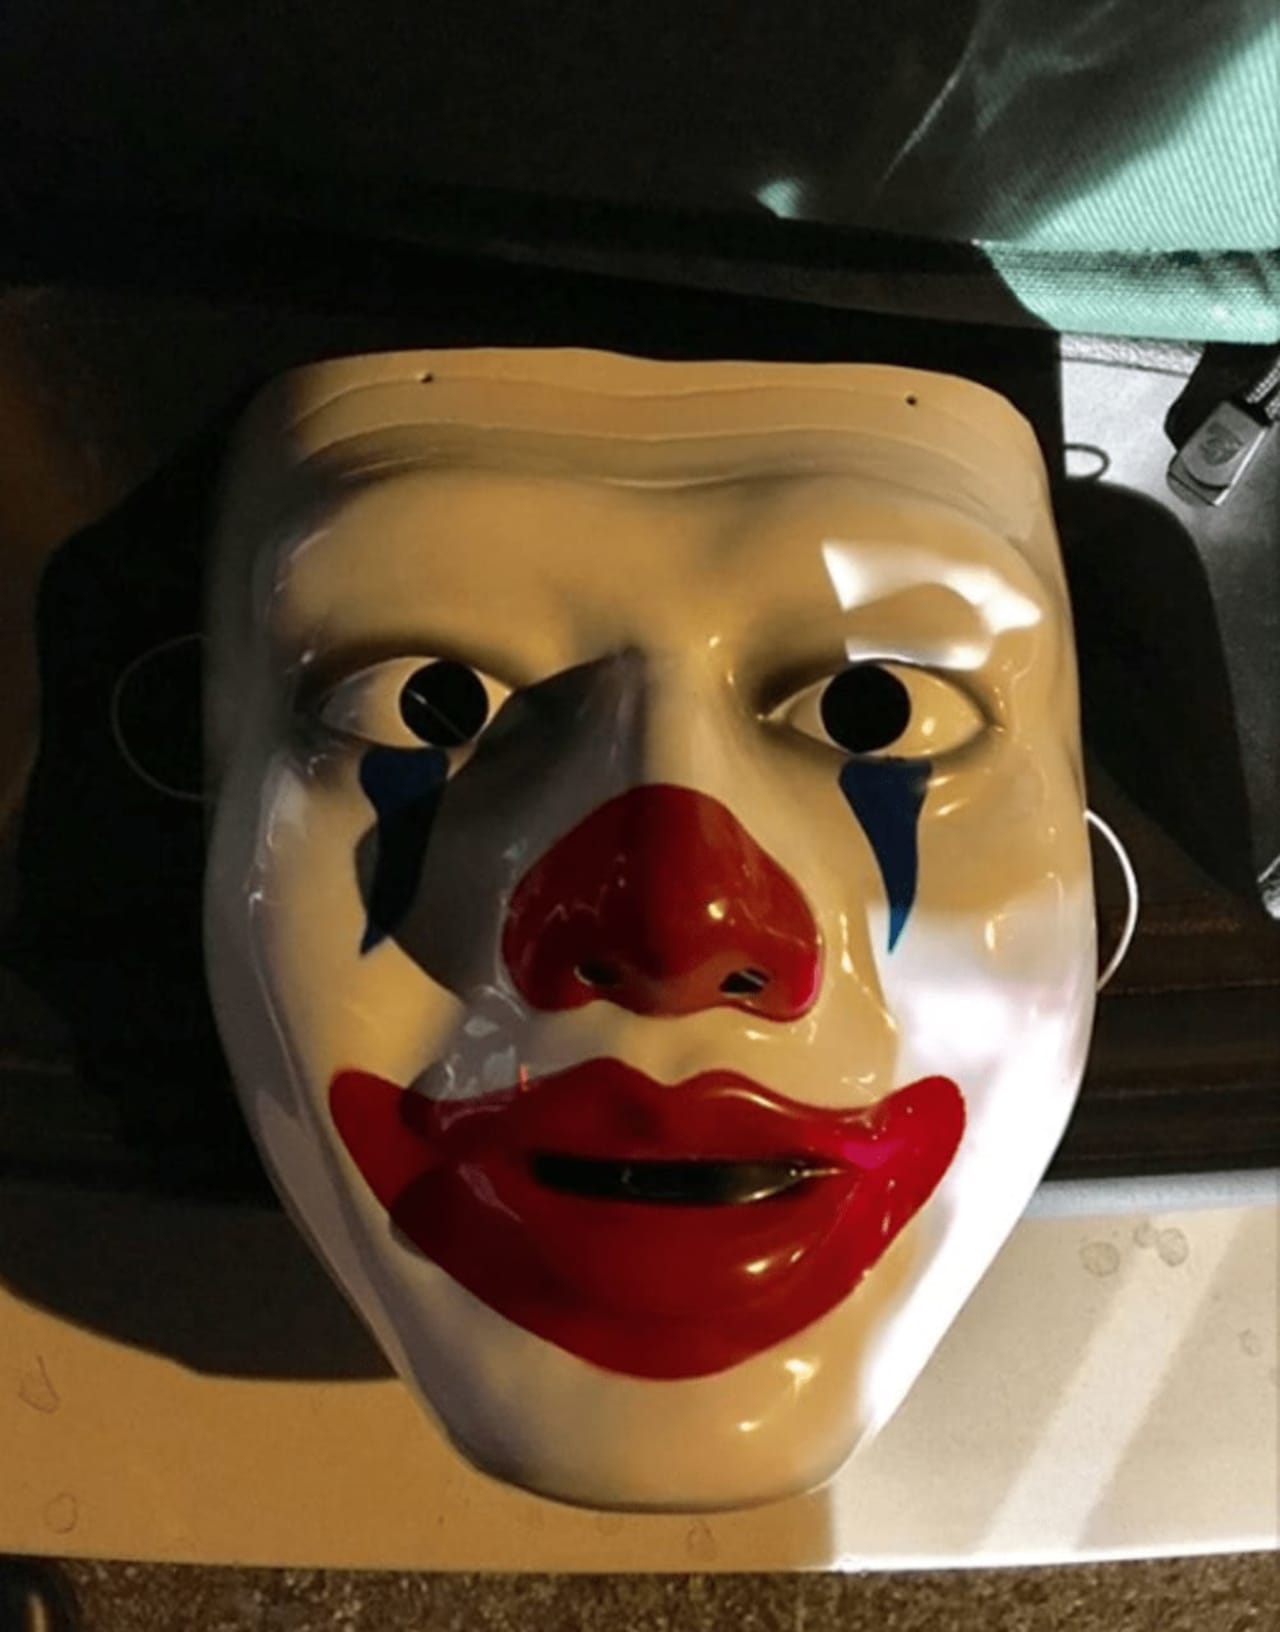 The Ossining Police Department reports it received a call Wednesday about a motorist wearing a clown mask "driving suspiciously" on Main Street.